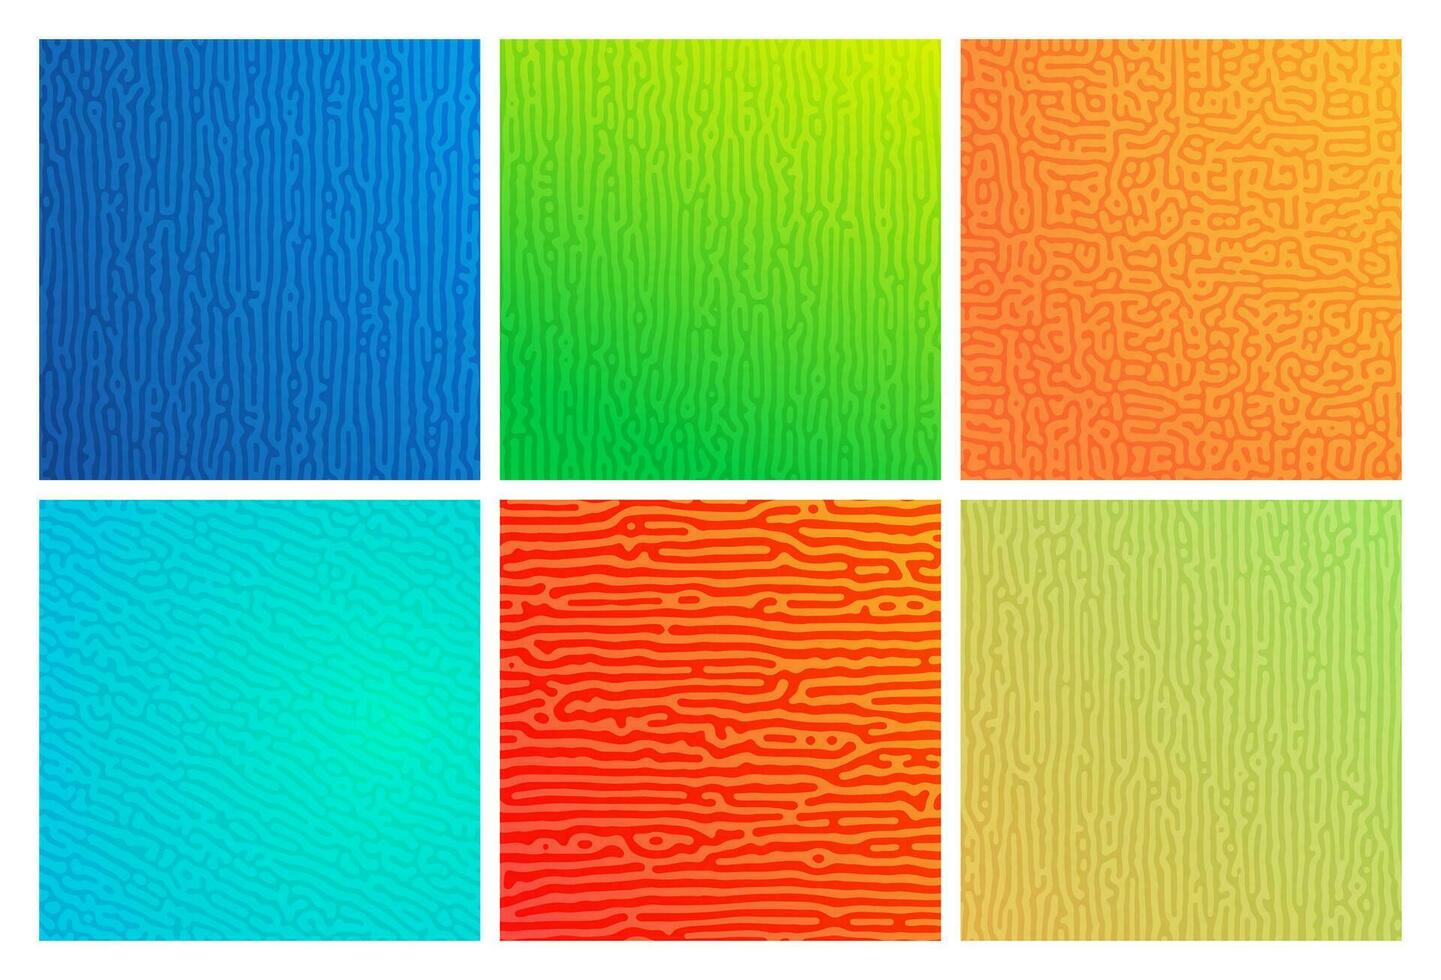 Turing reaction colorful background vector